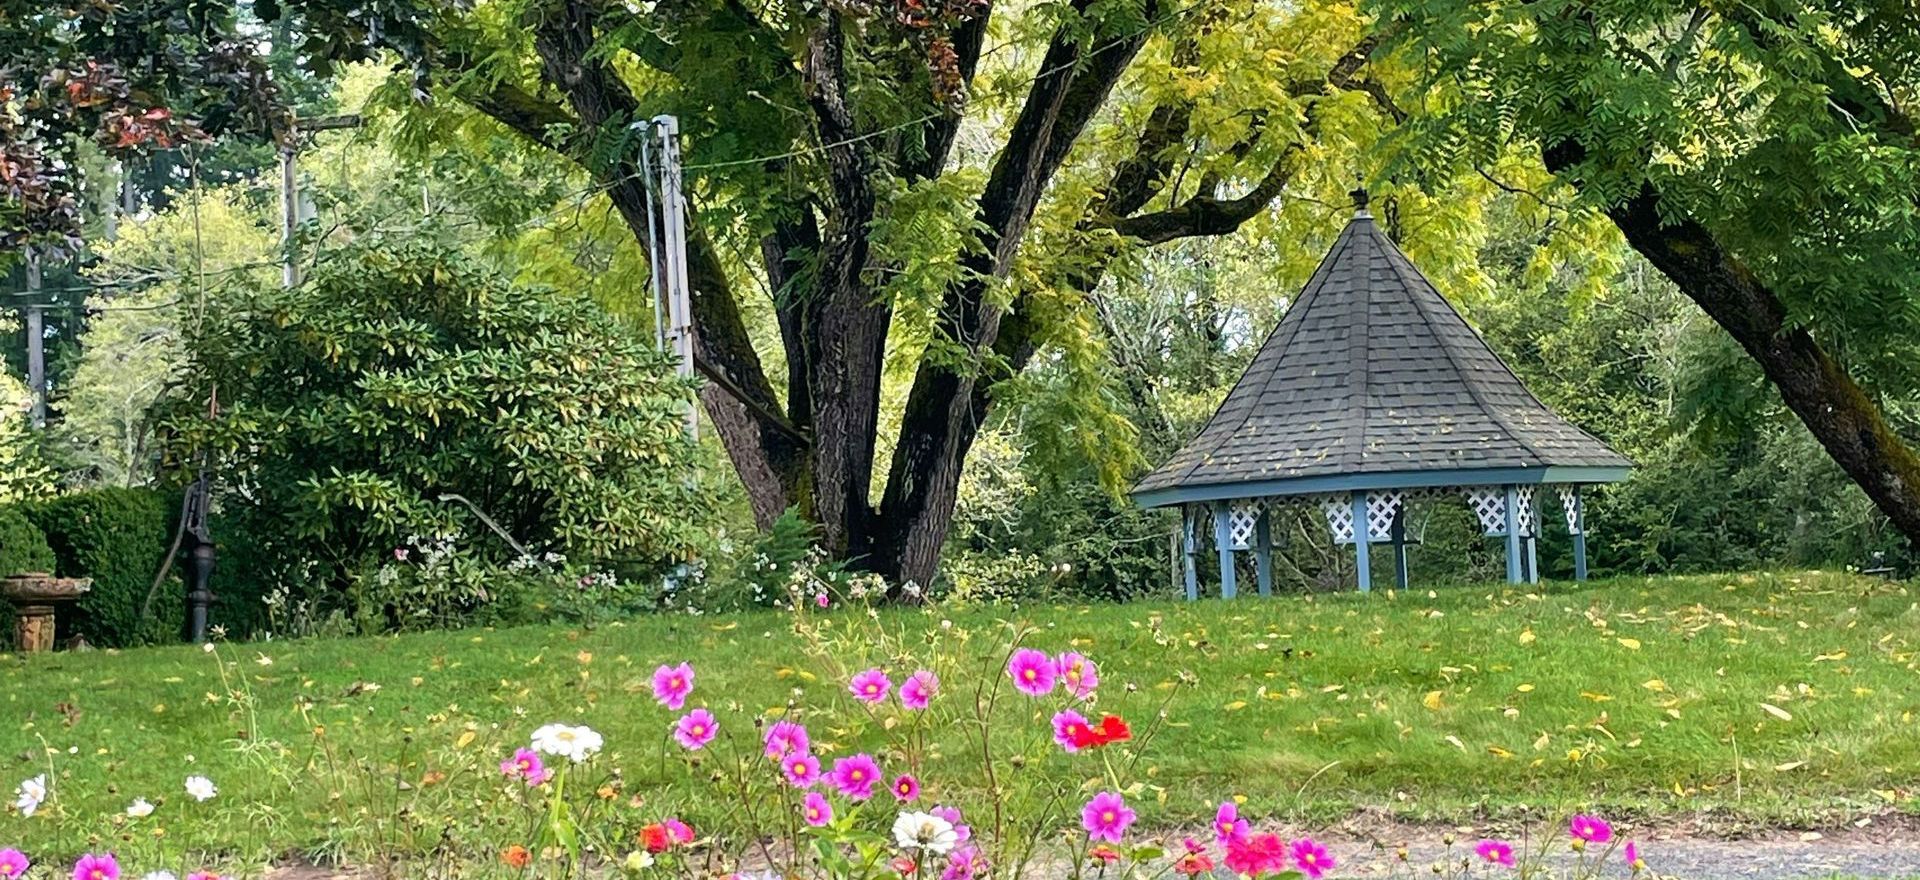 A spring garden with a gazebo in the background